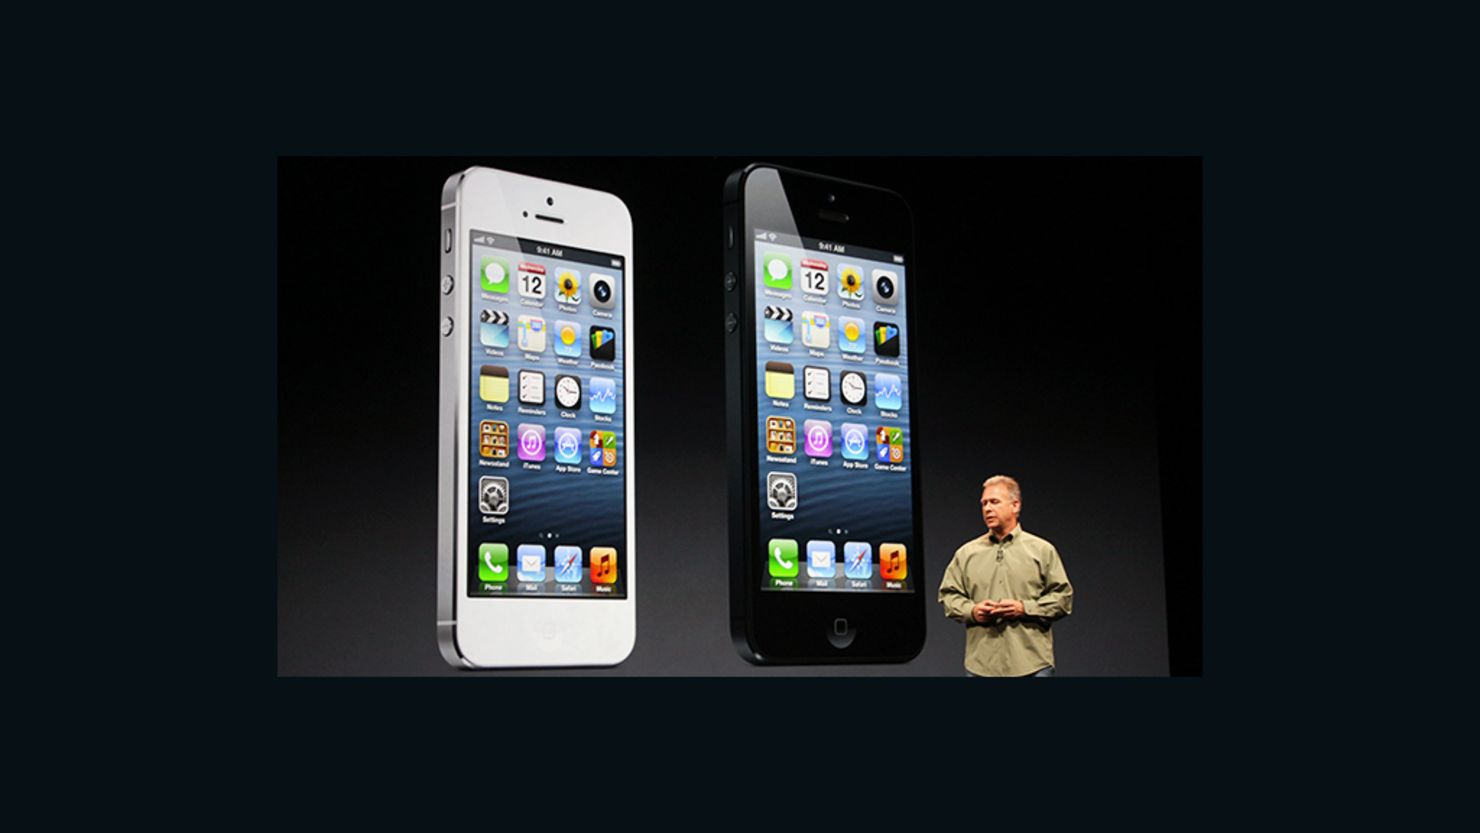 Apple's Phil Schiller speaks at the iPhone 5 press event in San Francisco on September 12.